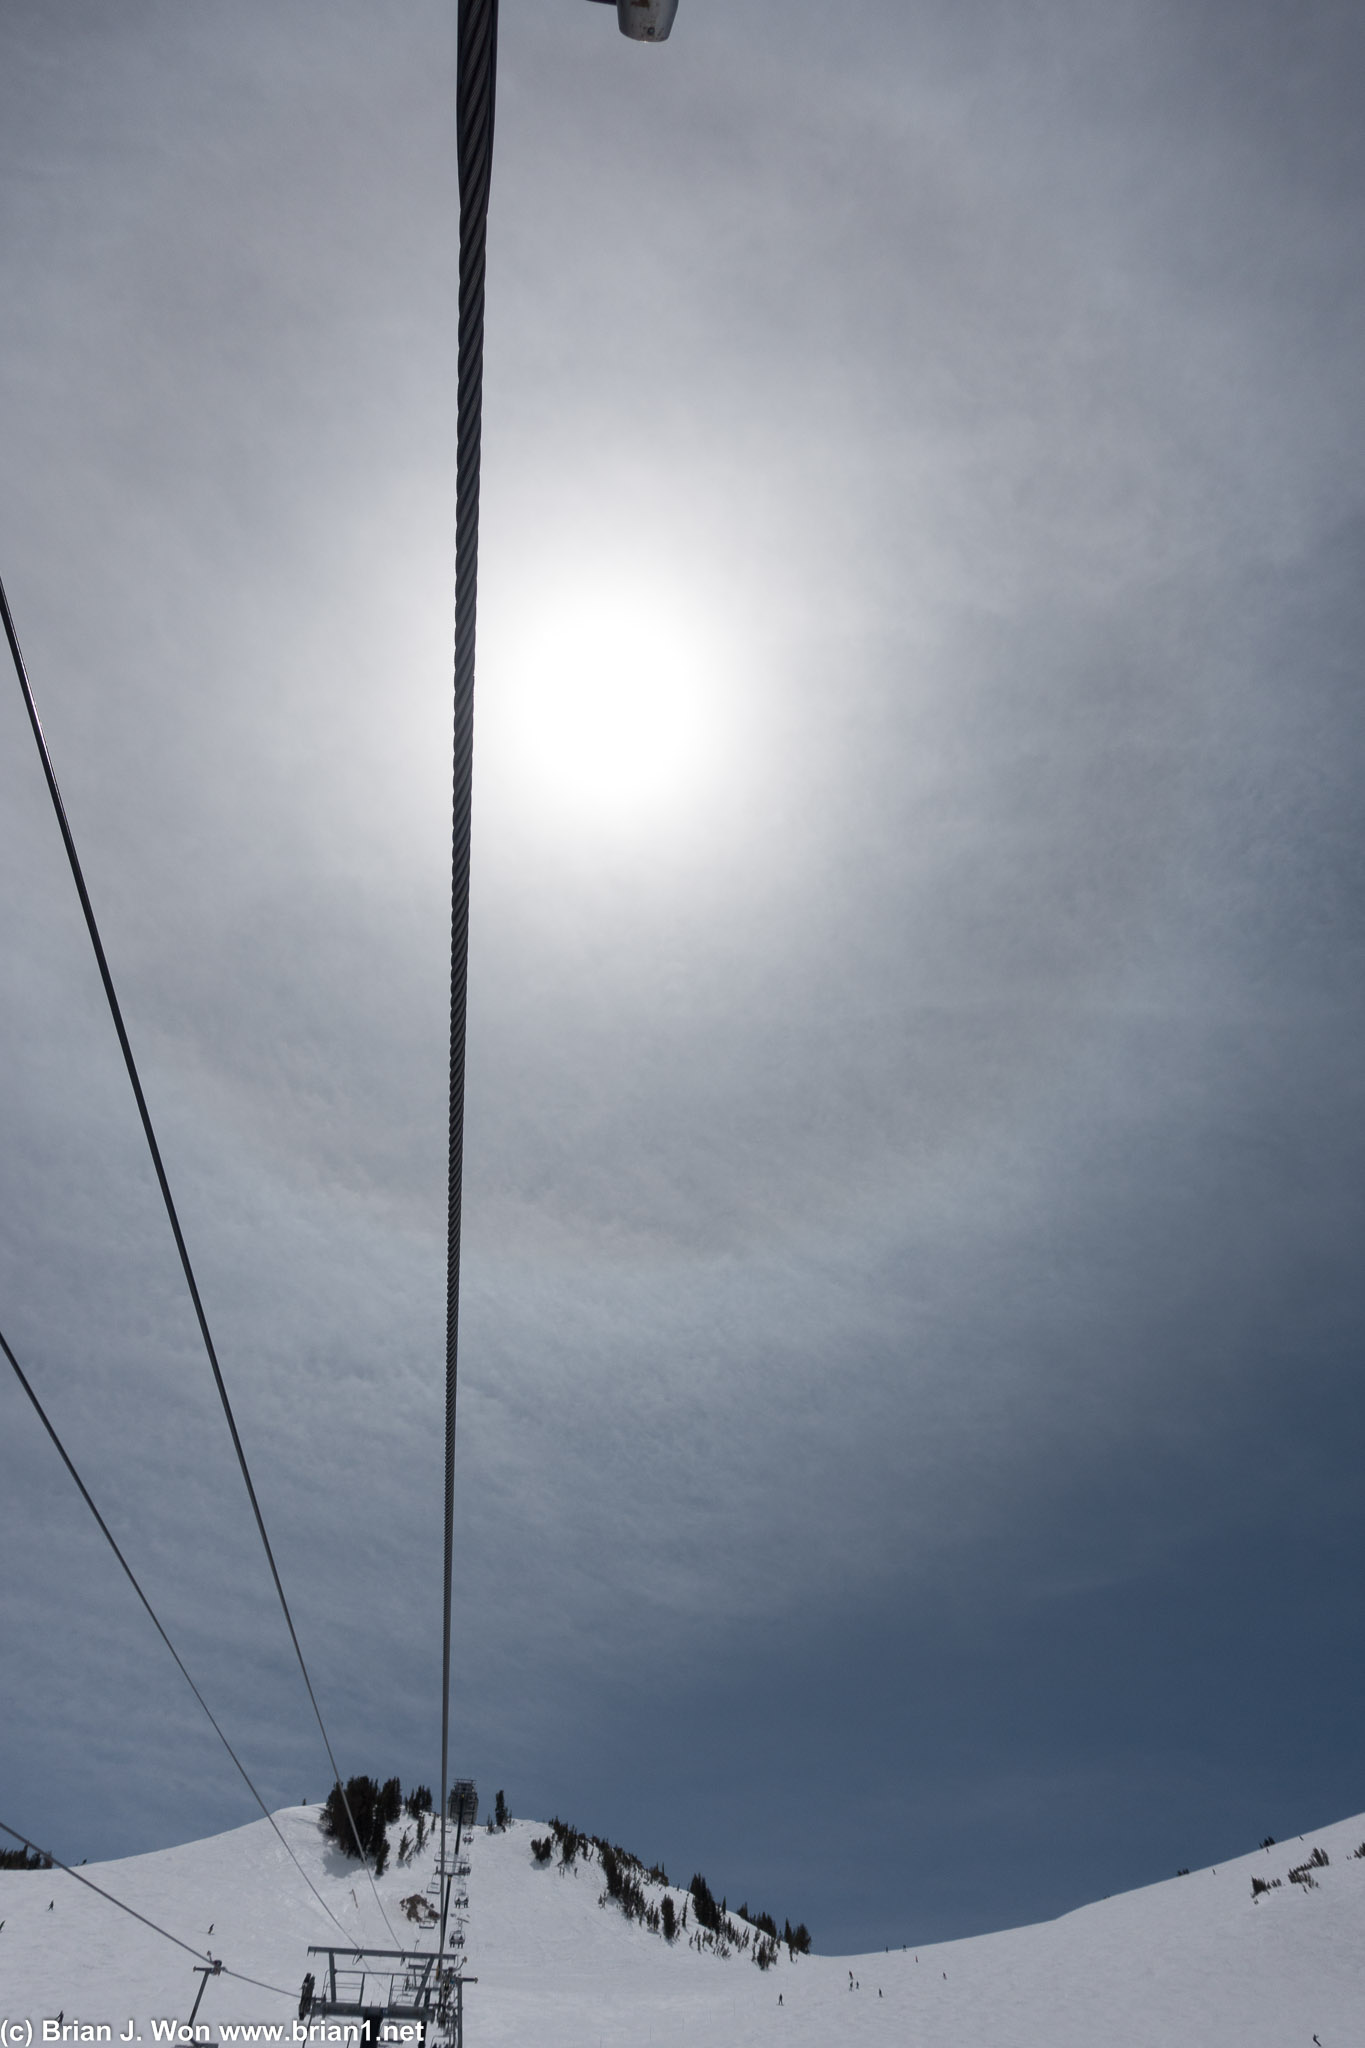 High clouds make for halos around the sun.